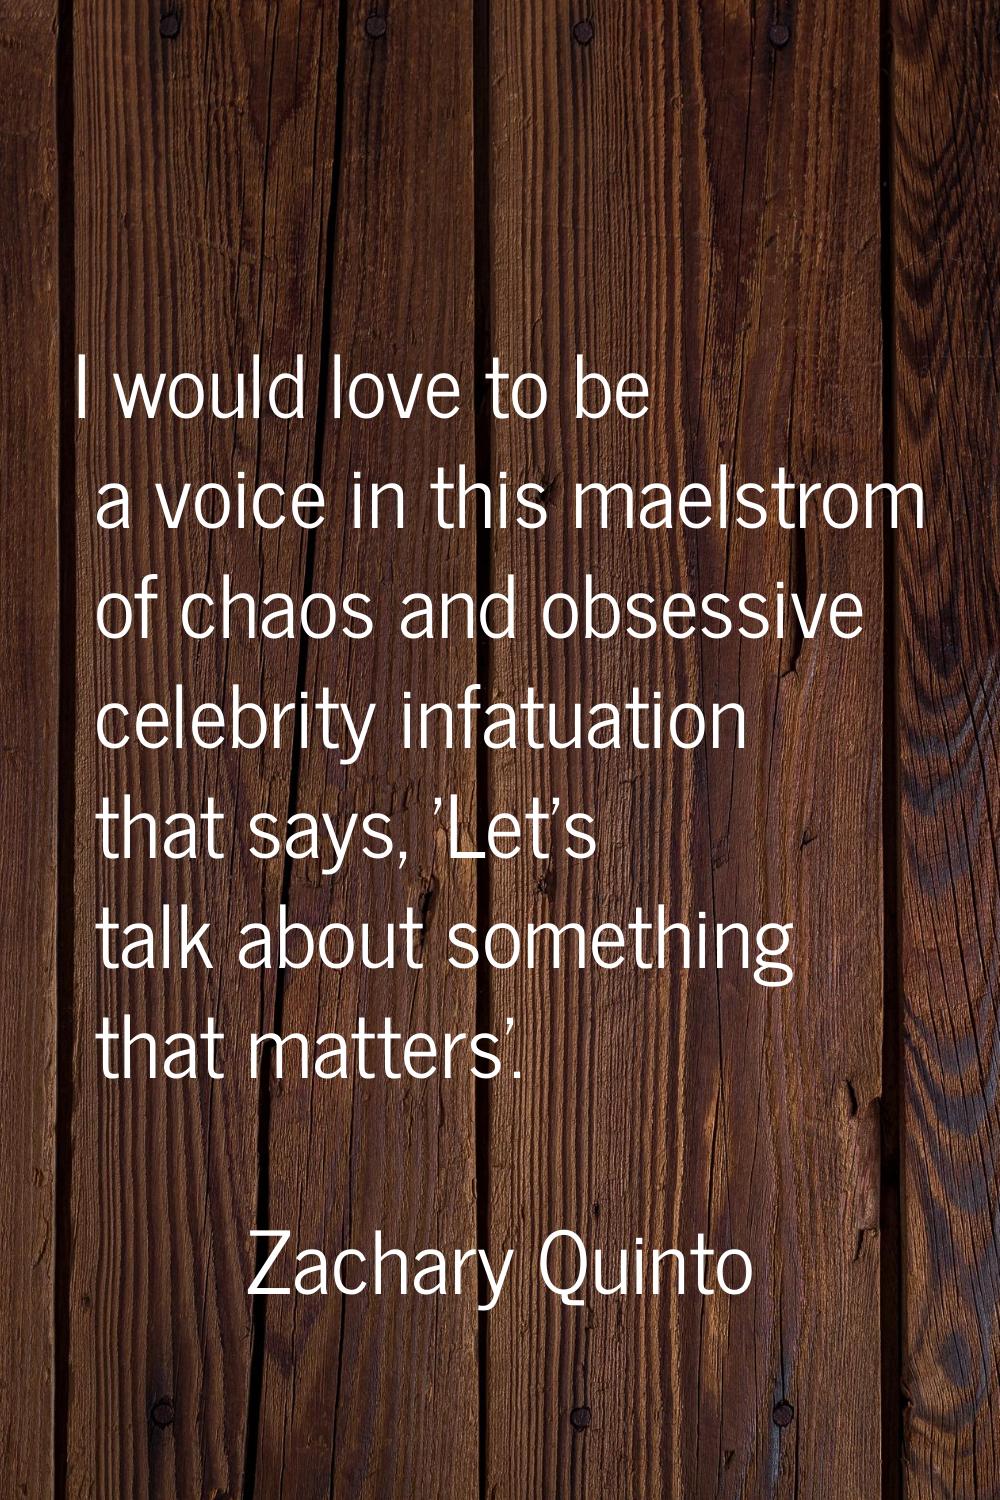 I would love to be a voice in this maelstrom of chaos and obsessive celebrity infatuation that says